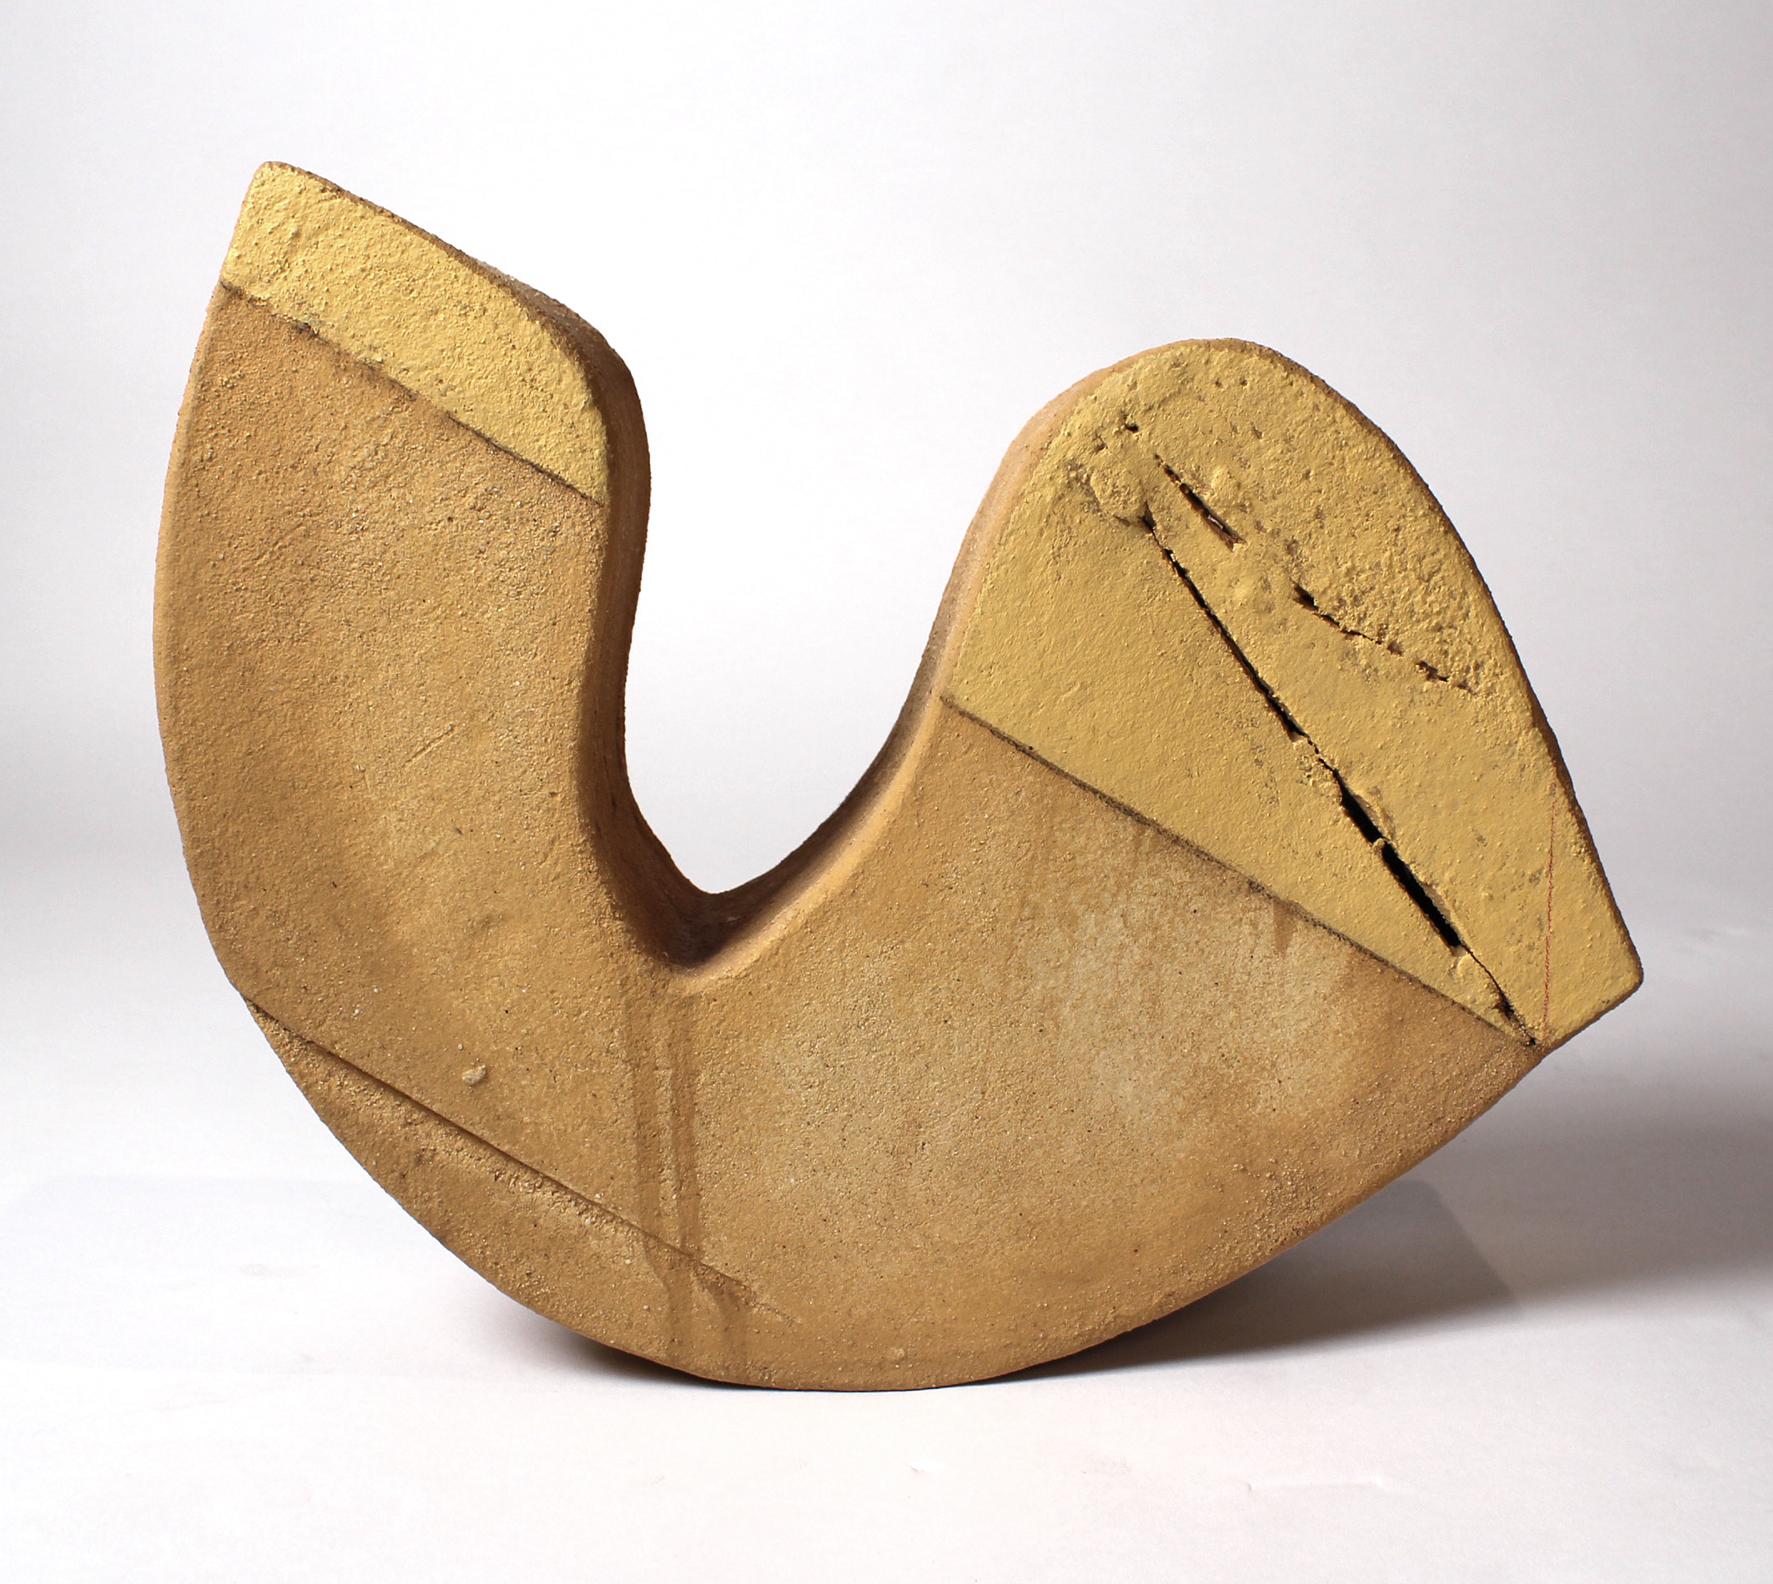 Signed abstract ceramic sculpture by artist Siddiq Kahn. Purchased during an exhibition at the Nasher Museum in Dallas, TX.

Siddiq Khan was born in Guyana and raised in Canada and London. He received a Diploma of Fine Art at the Byam Shaw School